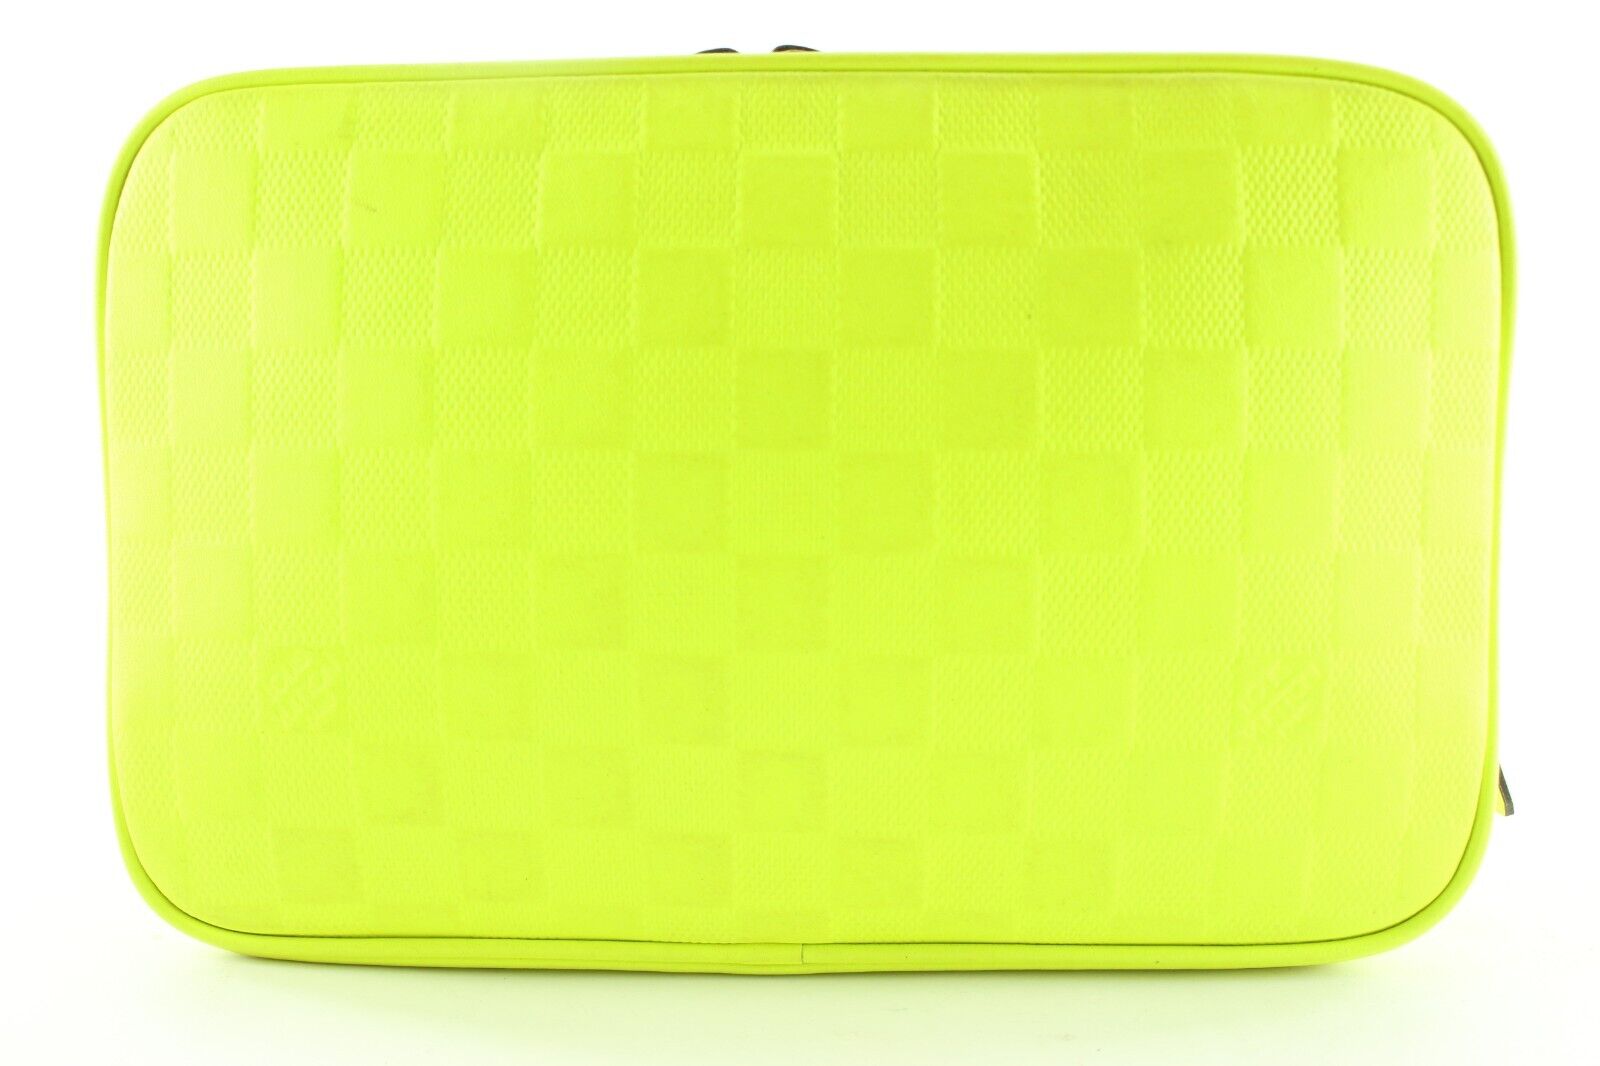 Louis Vuitton Neon Green Damier Infini Leather Trousse Cosmetic